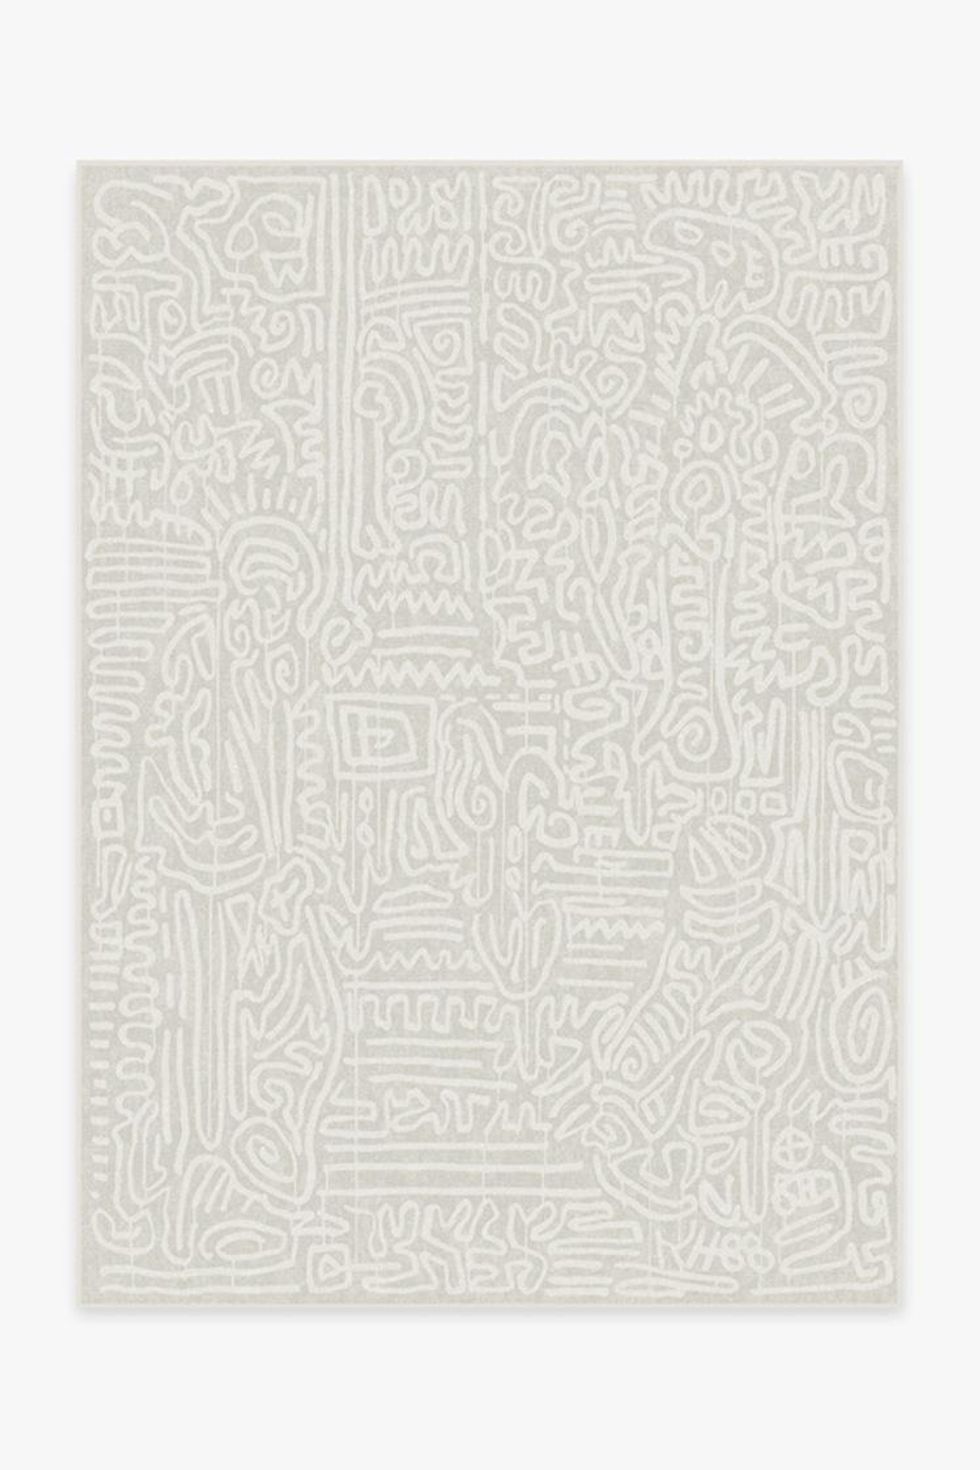 keith-haring-freestyle-pearl-a-rc-kh024-57.jpg